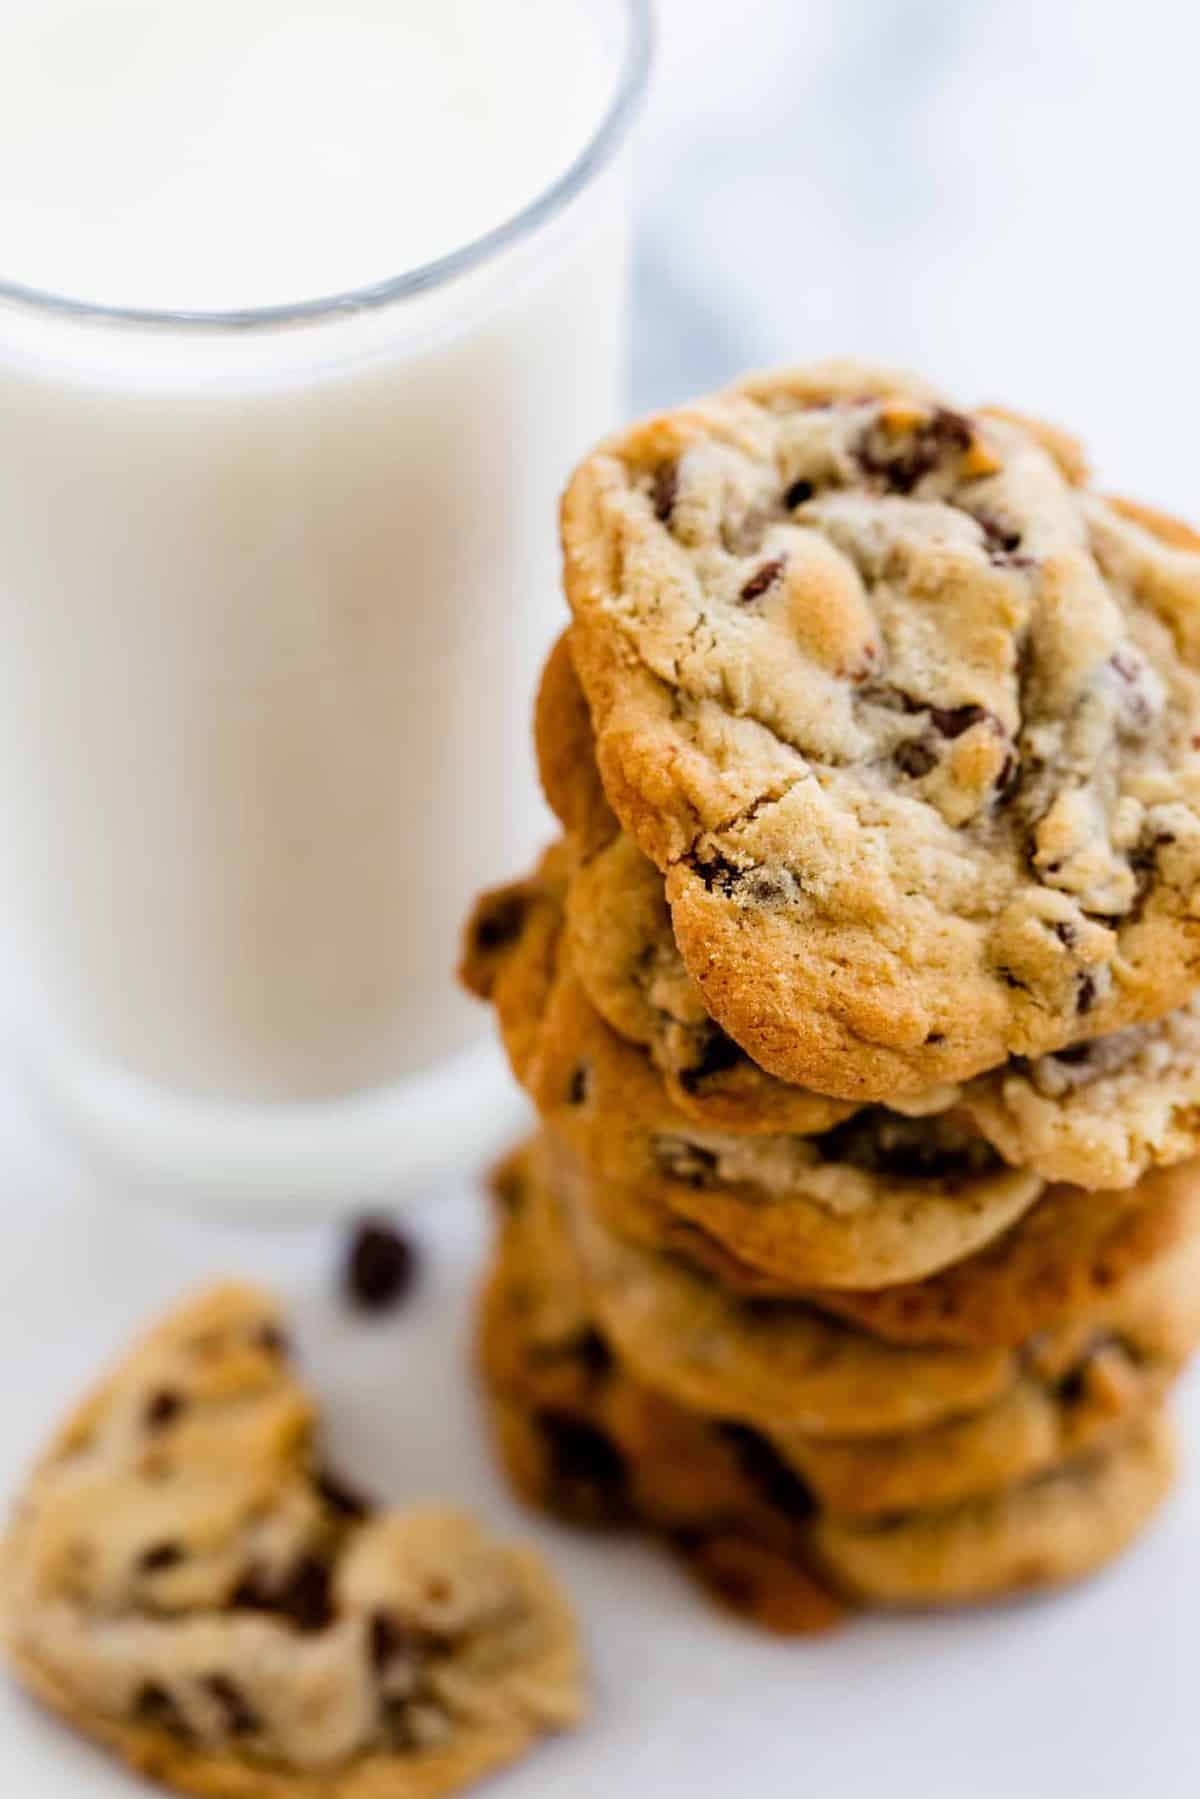 A tall stack of chocolate chip cookies sits next to a glass of milk.